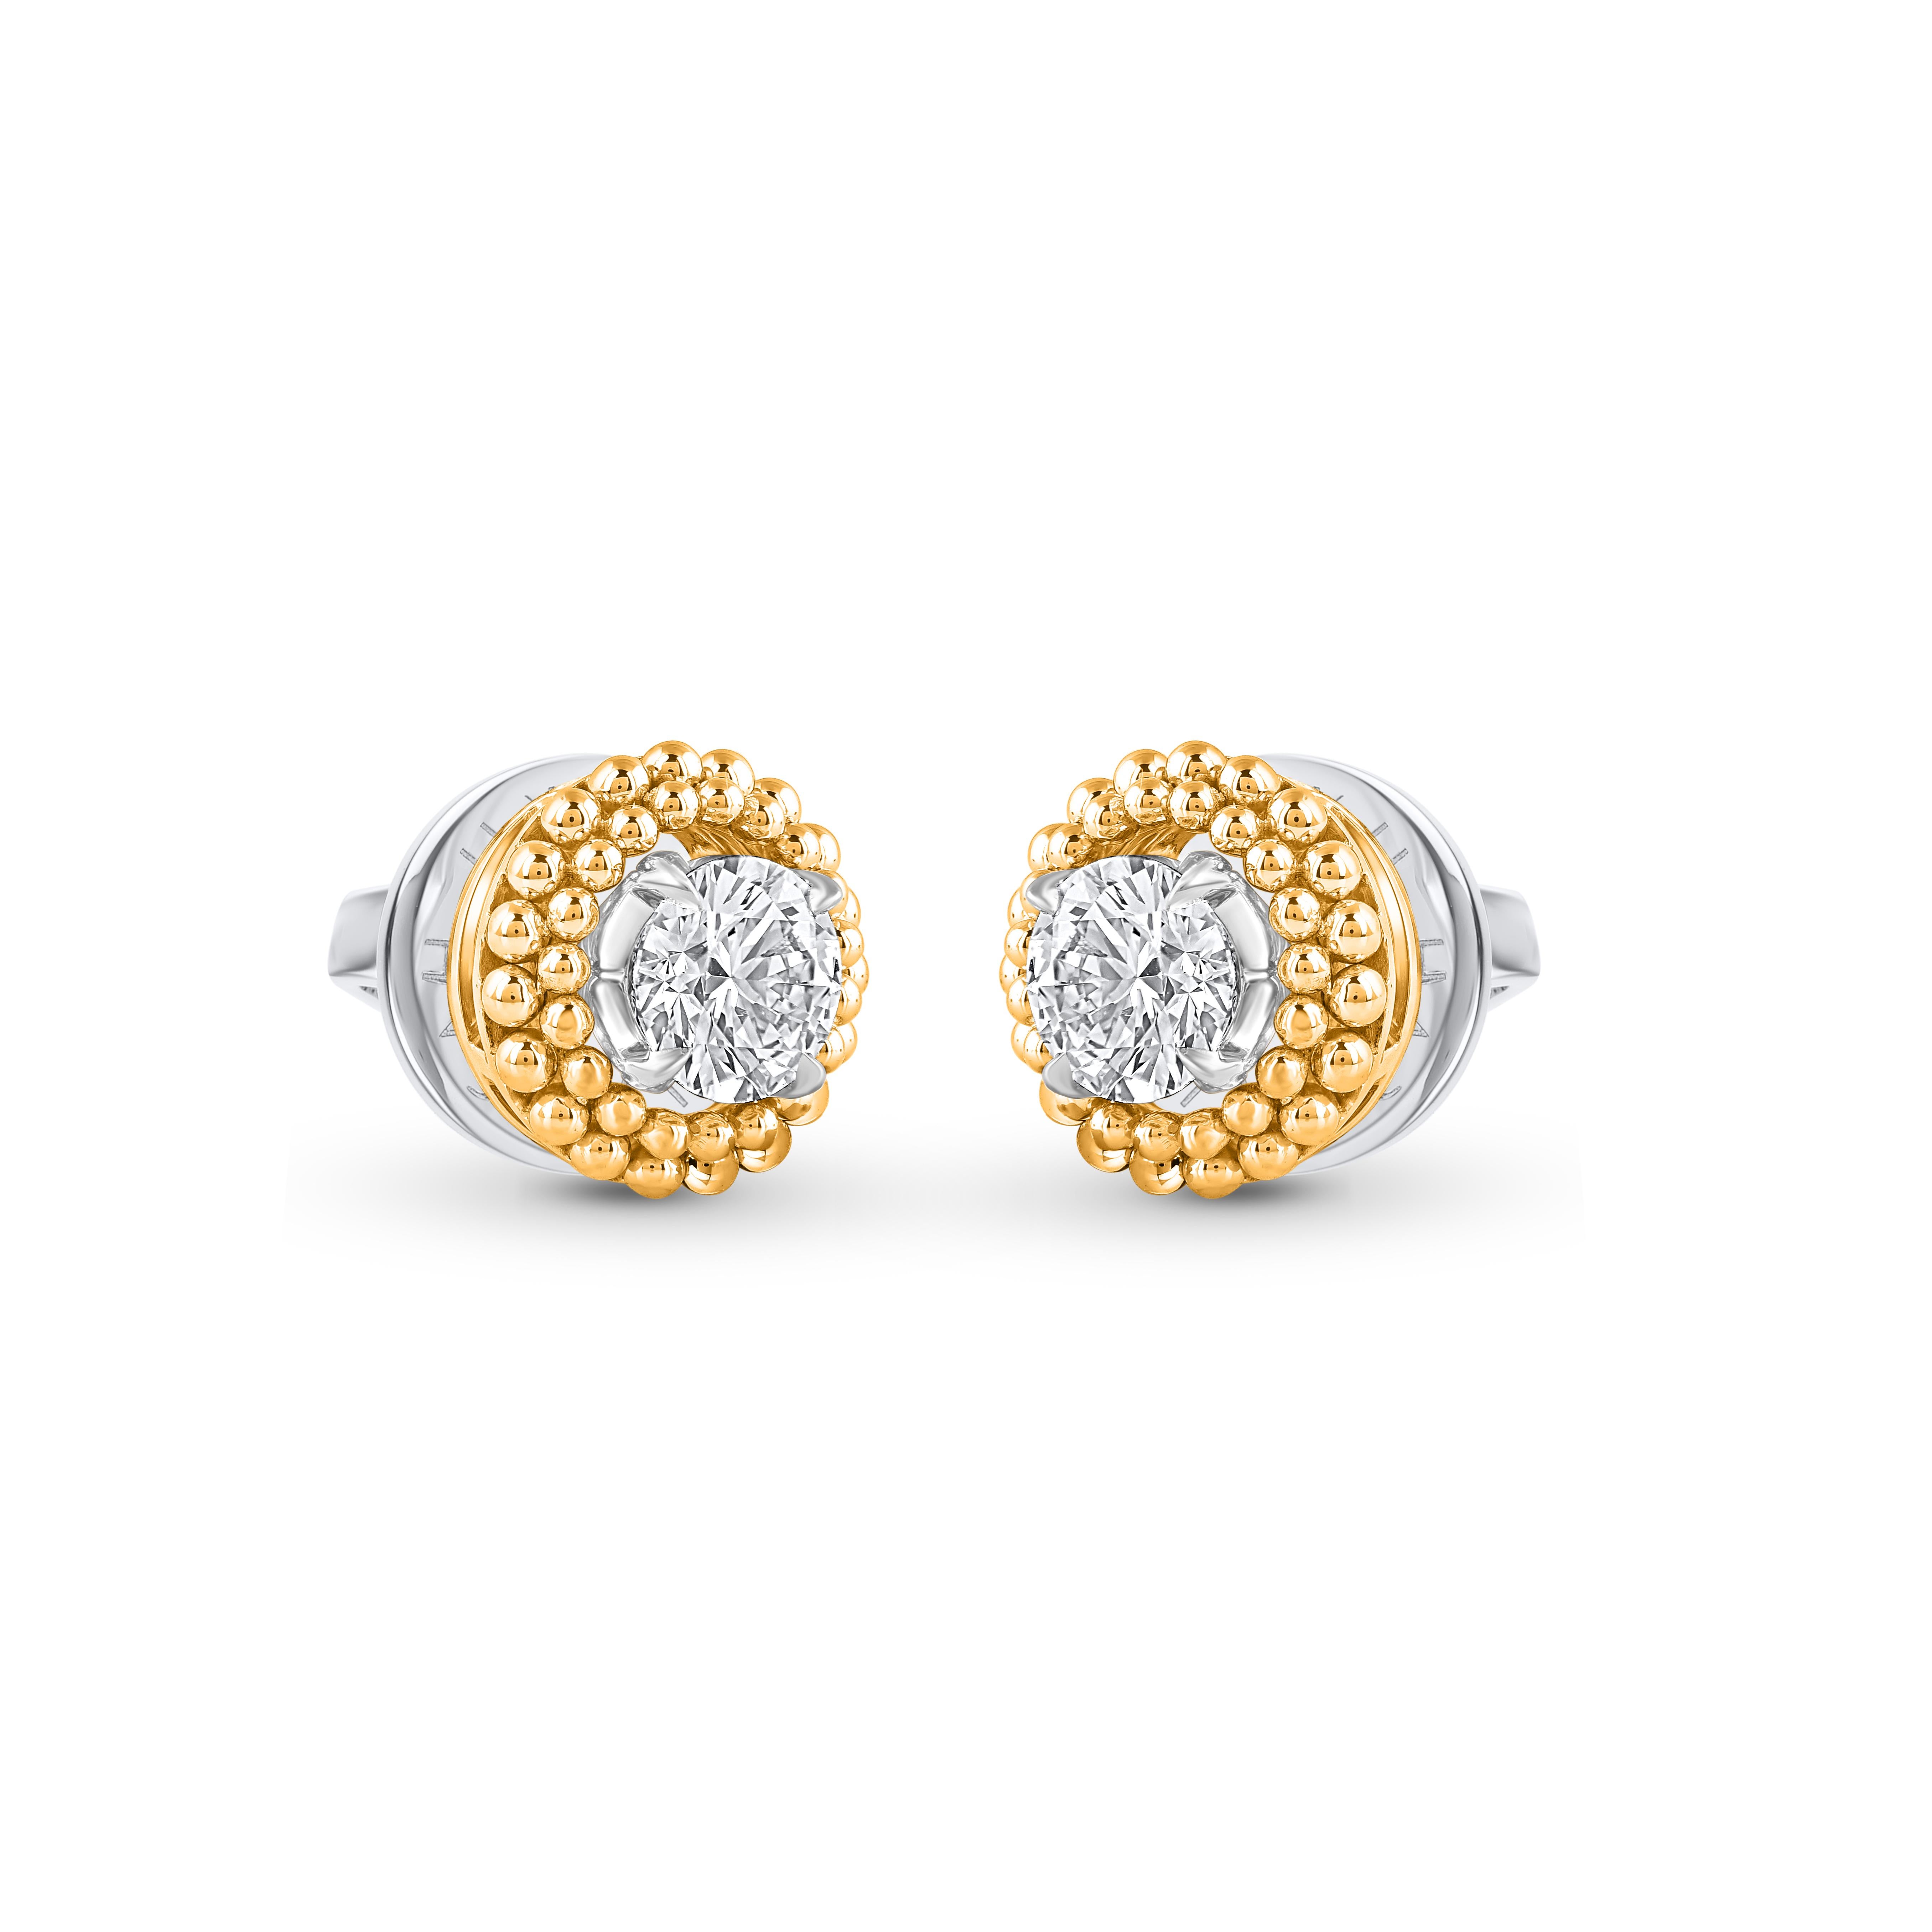 Inspired by the Journey of the sun’s rays traveling through space and time to brighten our world Brilliant cut round diamonds are set in 18kt gold. An artisanal form of embroidery known as pota is recreated especially for gold using delicate hand